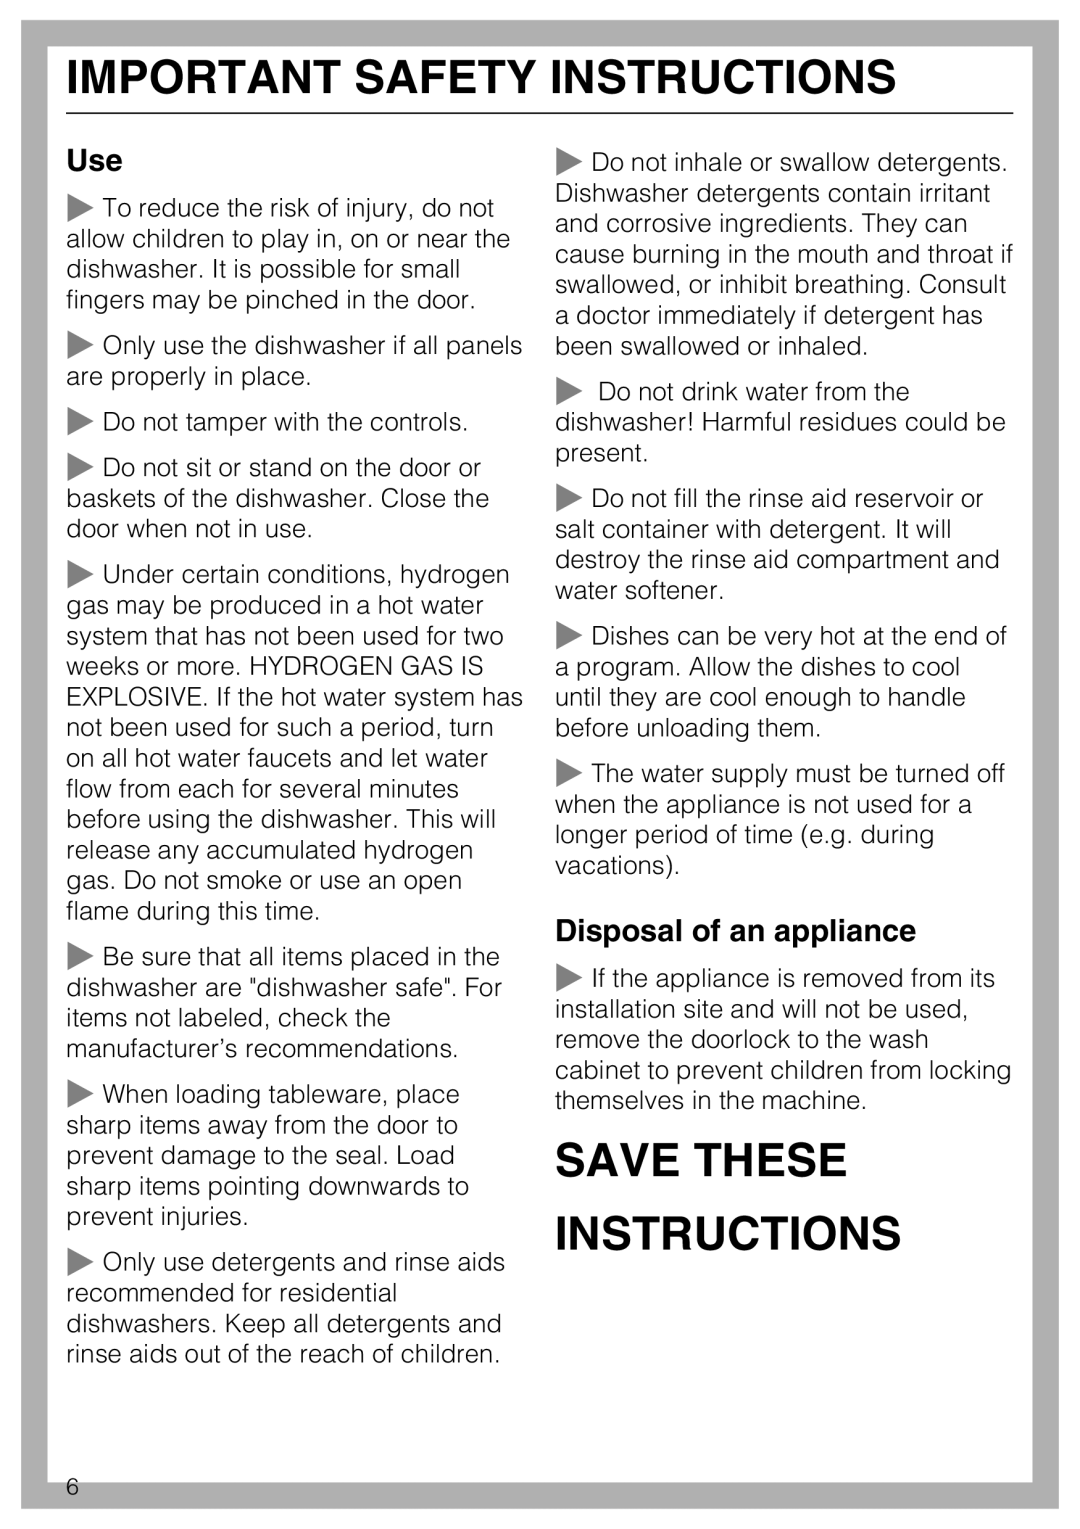 Miele G 5570, G 5575 manual Save These Instructions, Disposal of an appliance, Important Safety Instructions 